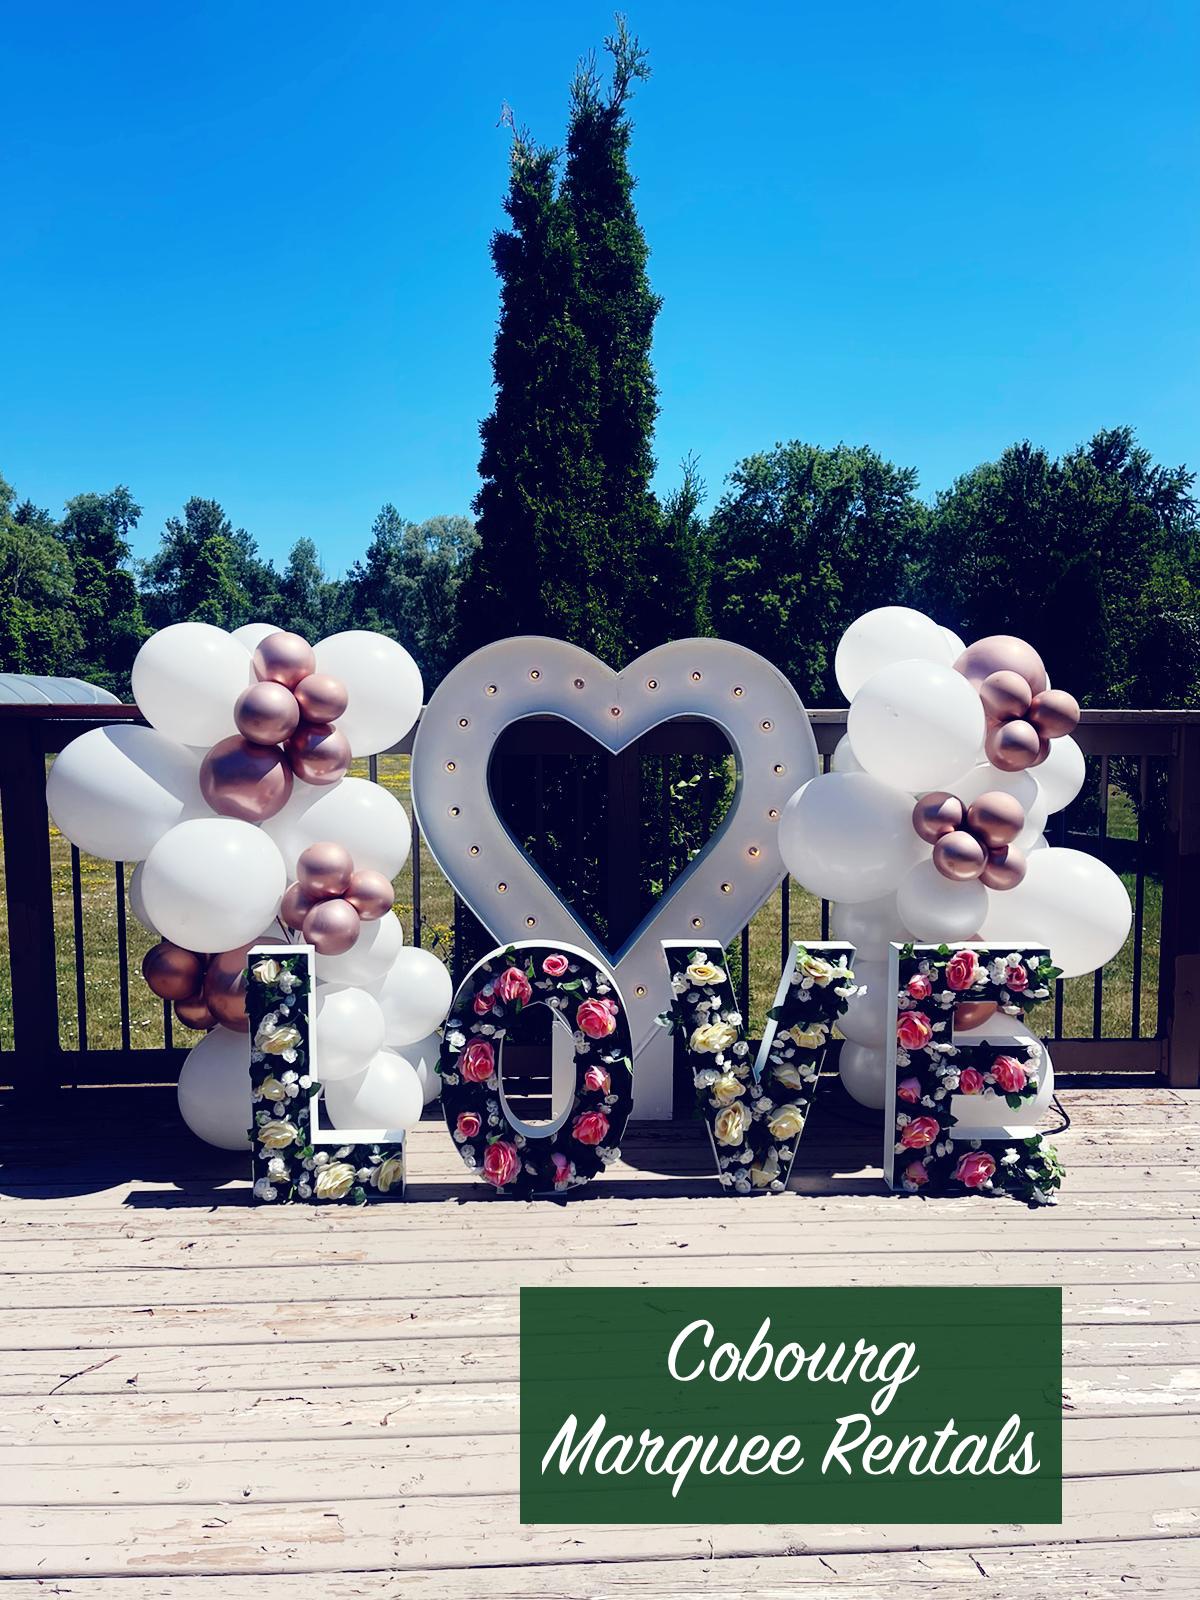 Cobourg marquee letter rentals